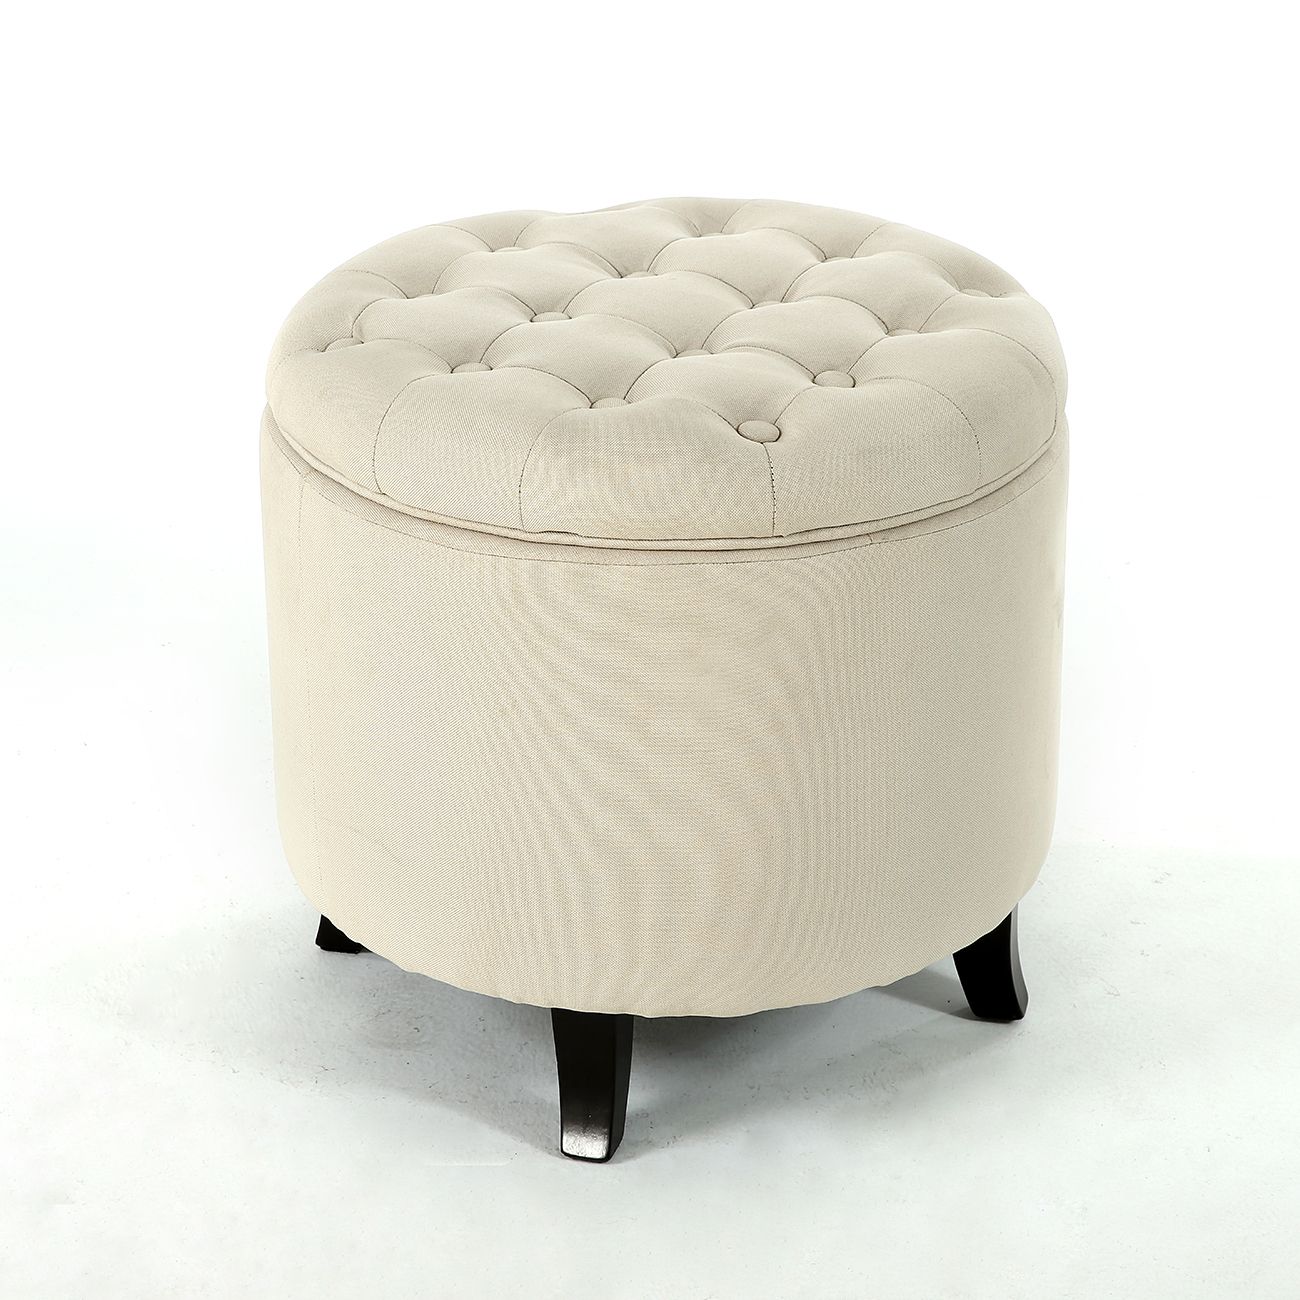 Round Storage Ottoman Beige Upholstered Button Tufted Foot Stool Seat Intended For Orange Fabric Nail Button Square Ottomans (View 7 of 20)